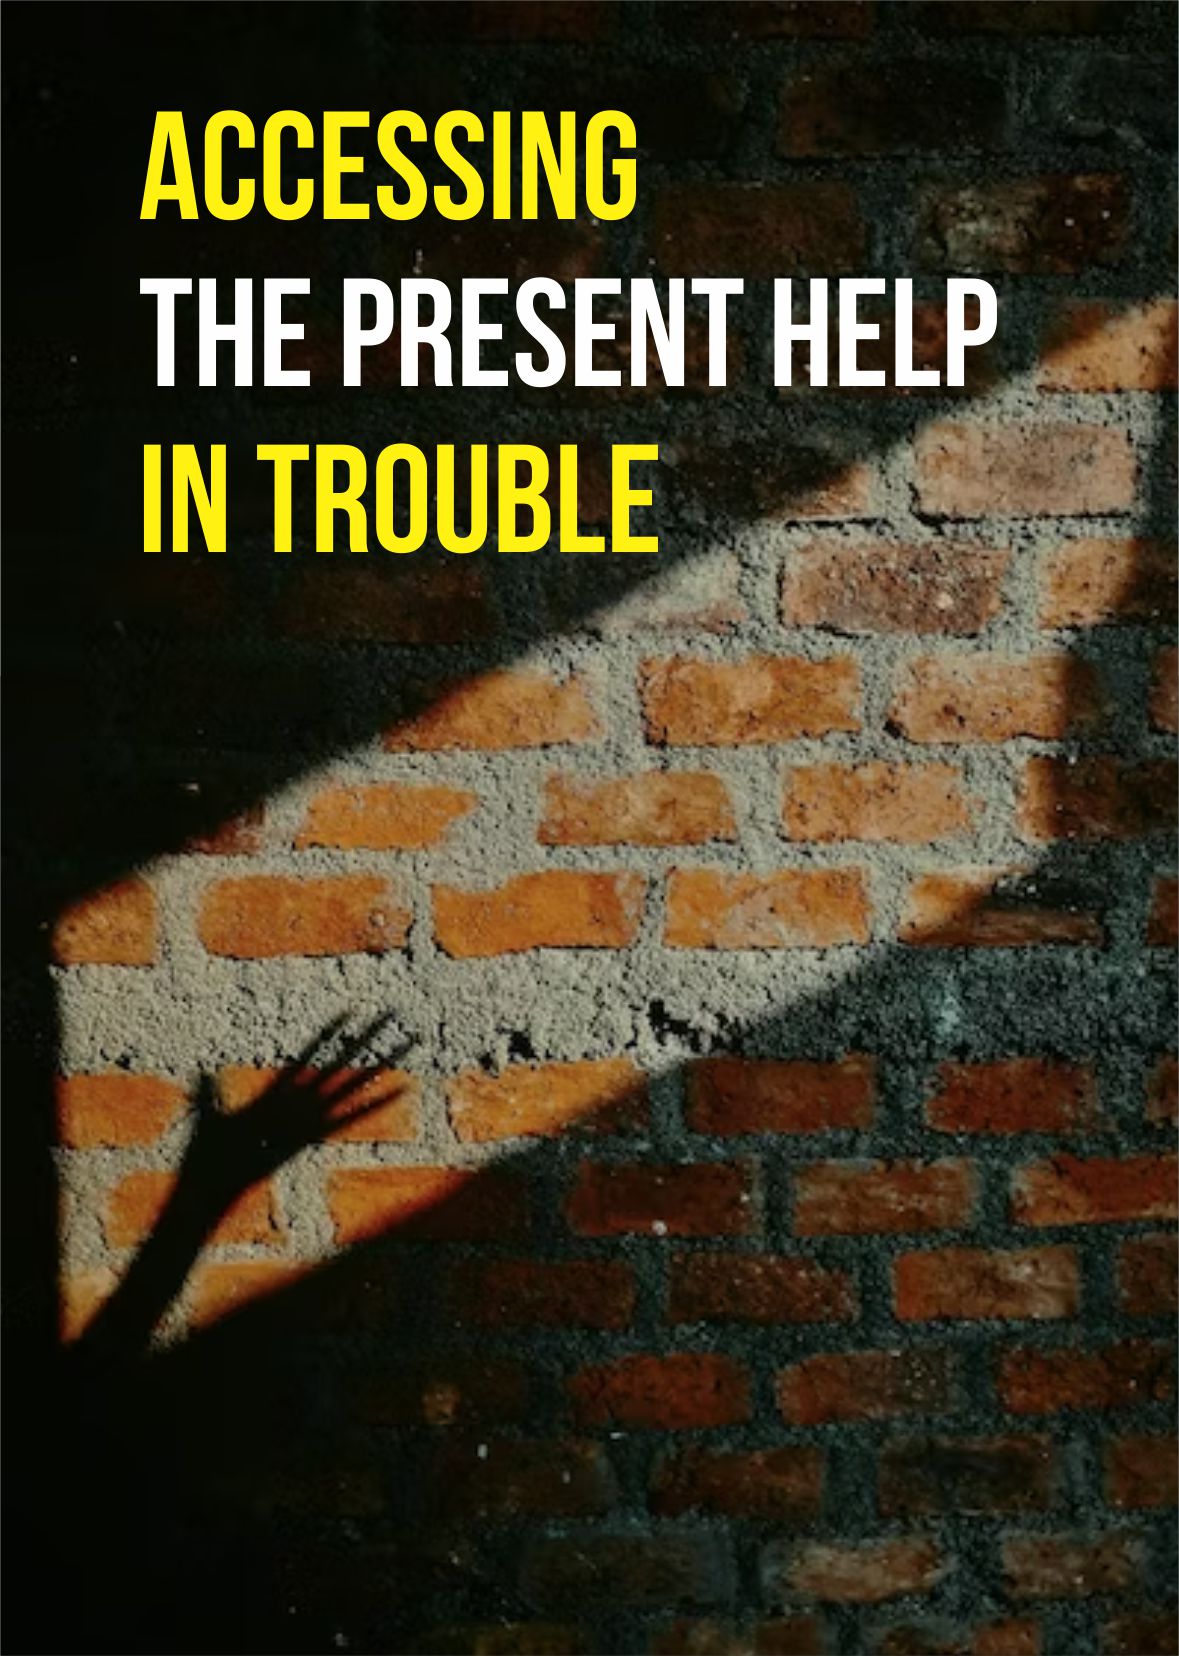 Accessing the Present Help in Trouble